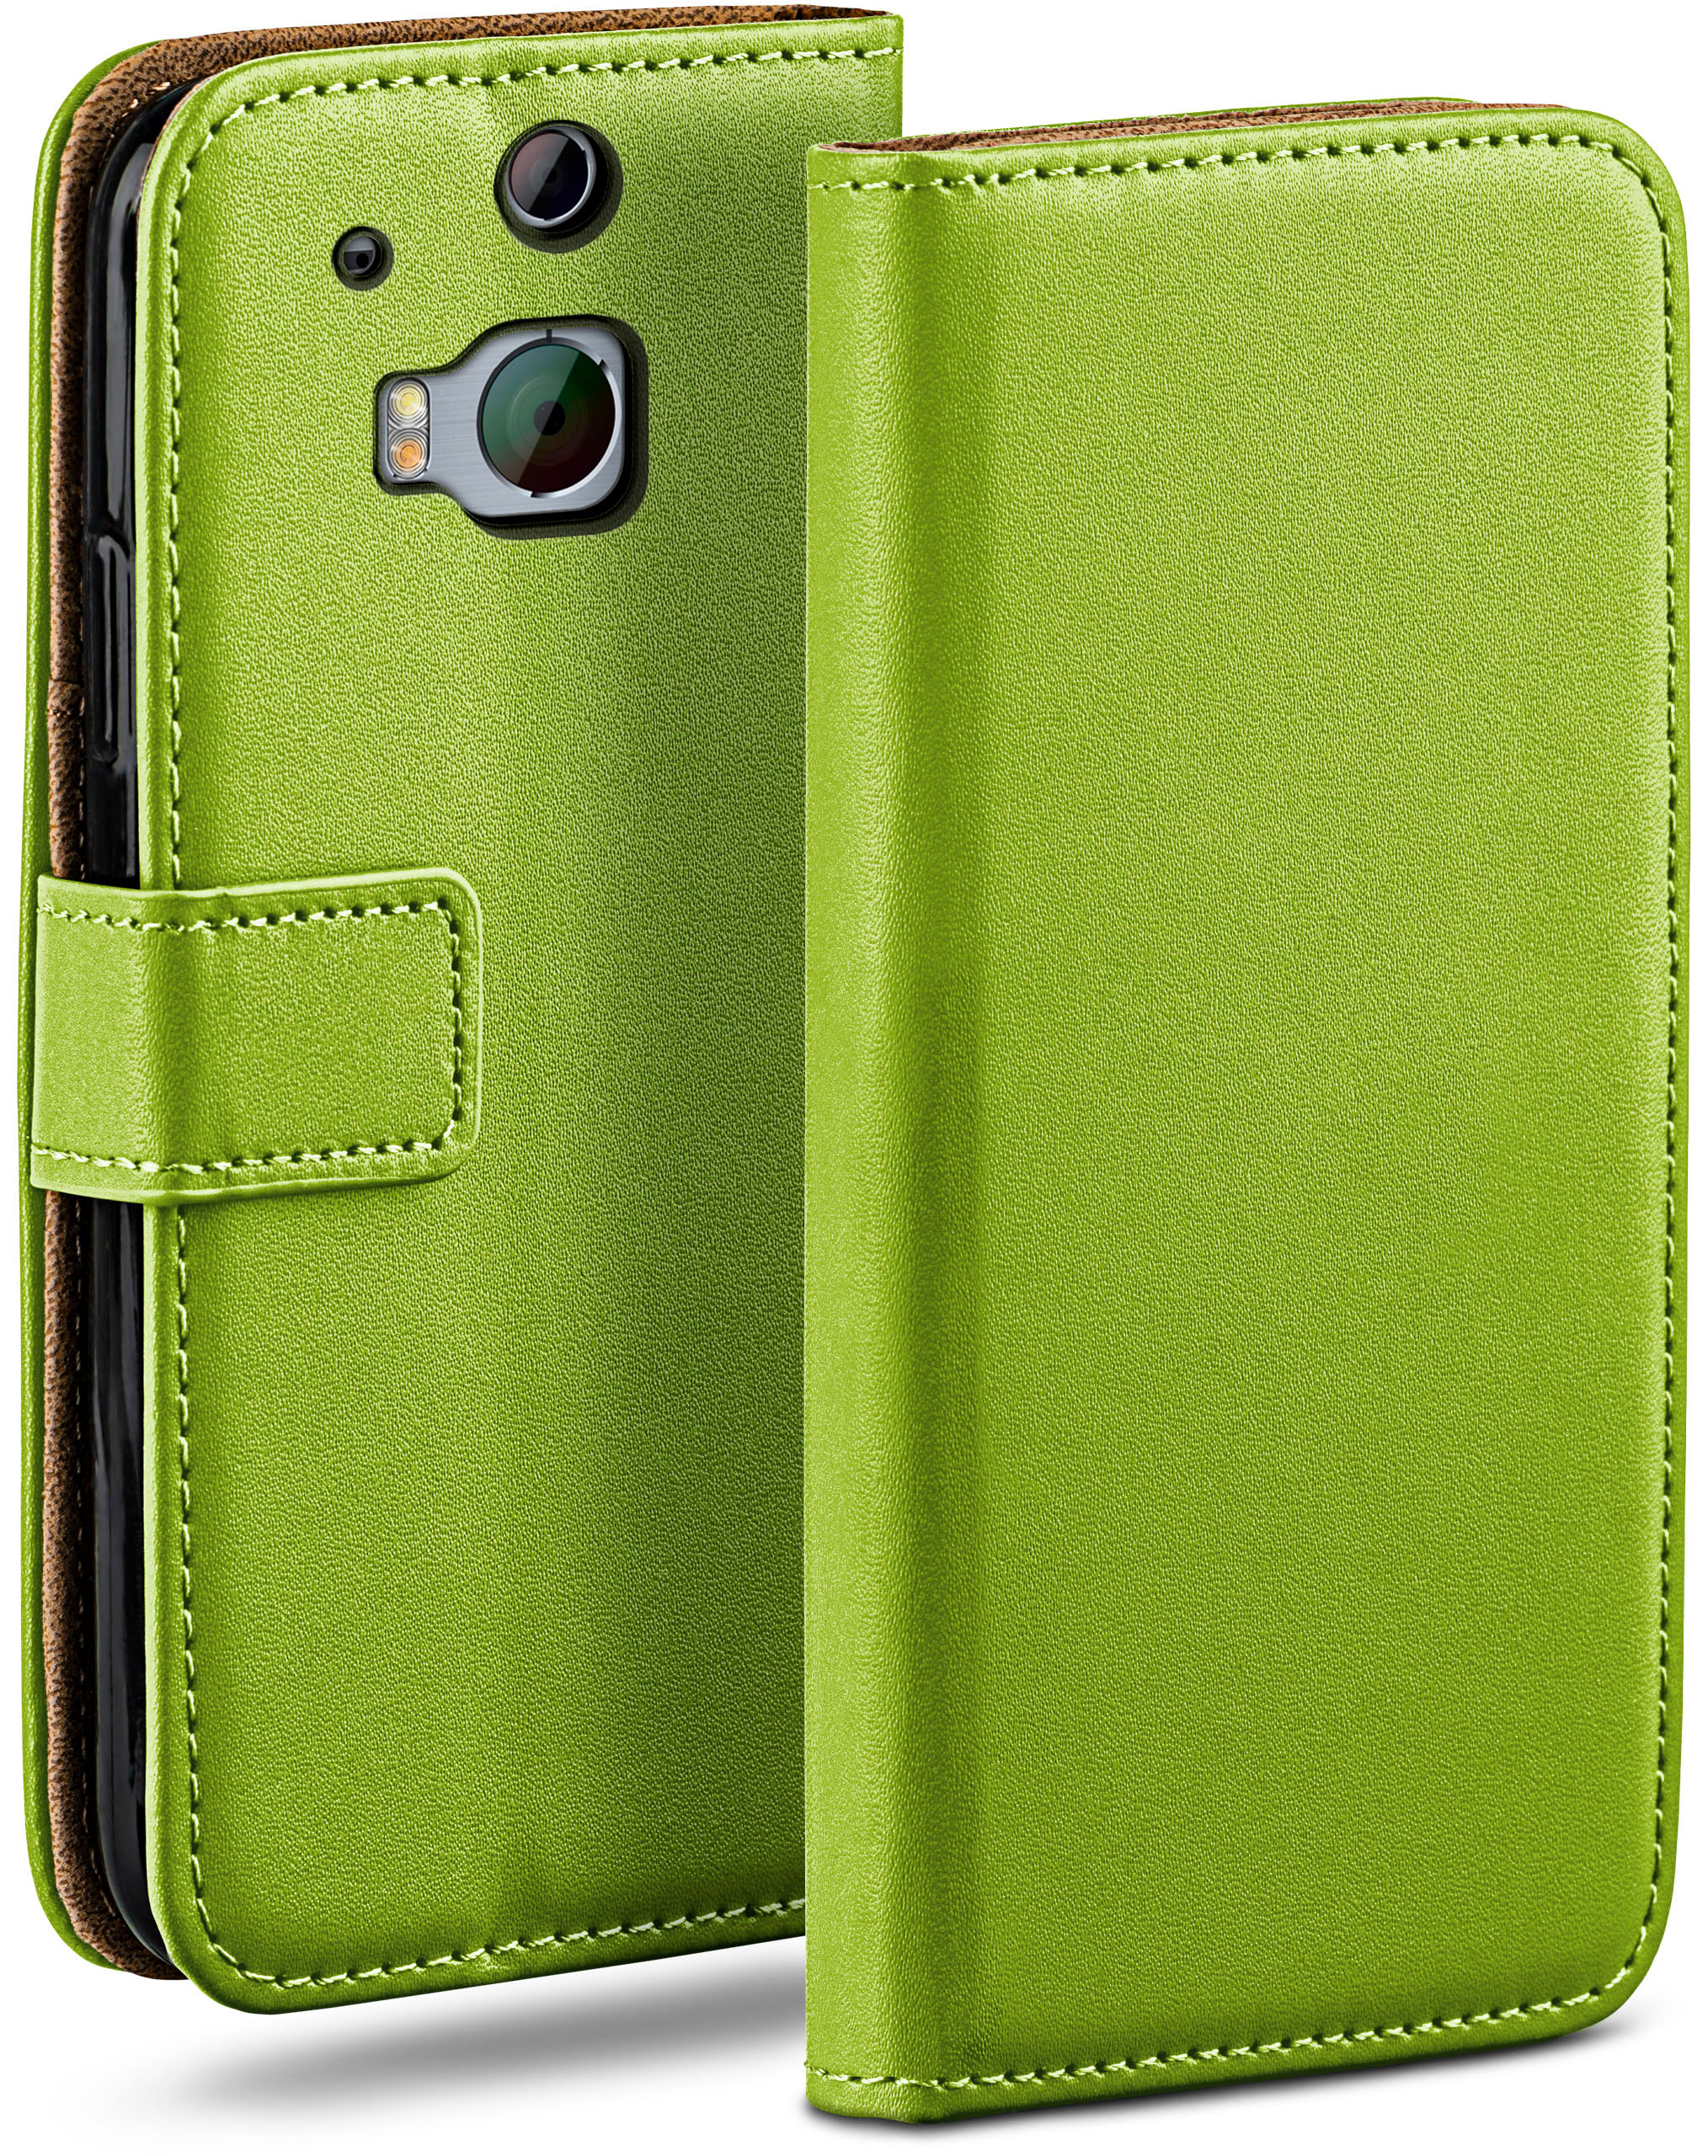 Book One / M8s, M8 Case, Bookcover, HTC, MOEX Lime-Green